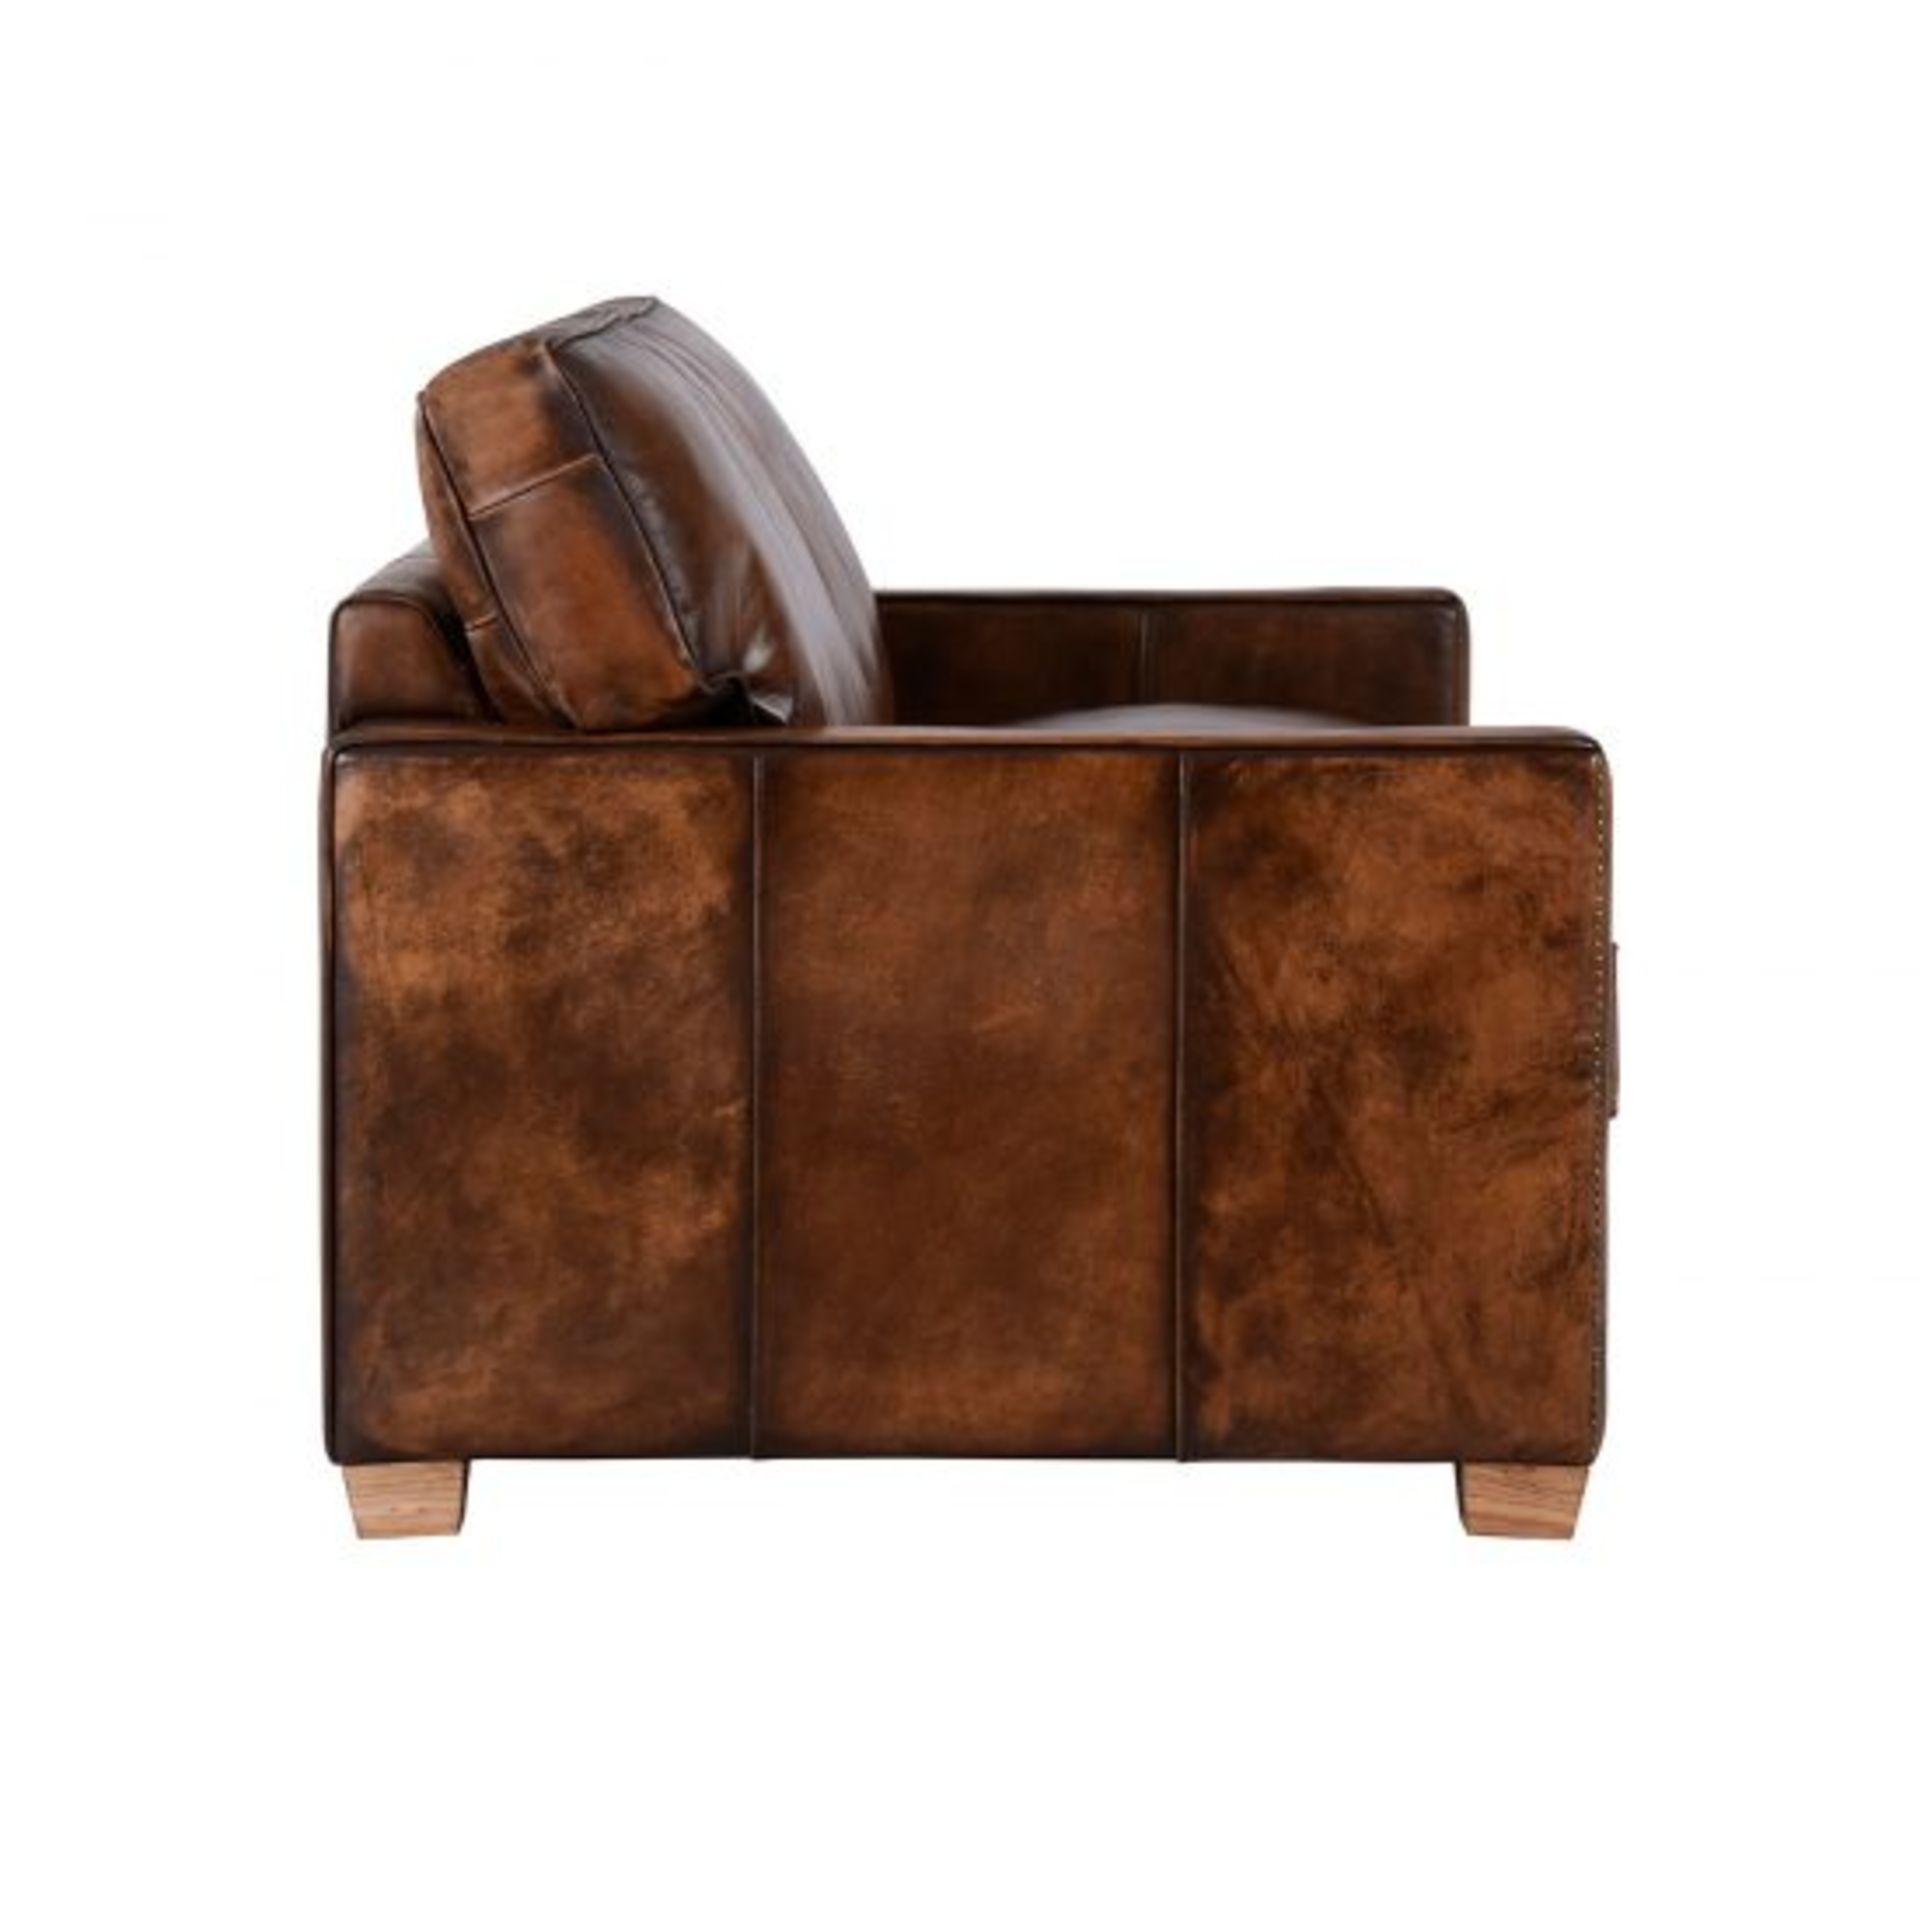 The Greaves Sofa 1 Seater Original Vintage Espresso Leather The Greaves Is A Classic Sofa With Mid- - Image 3 of 4